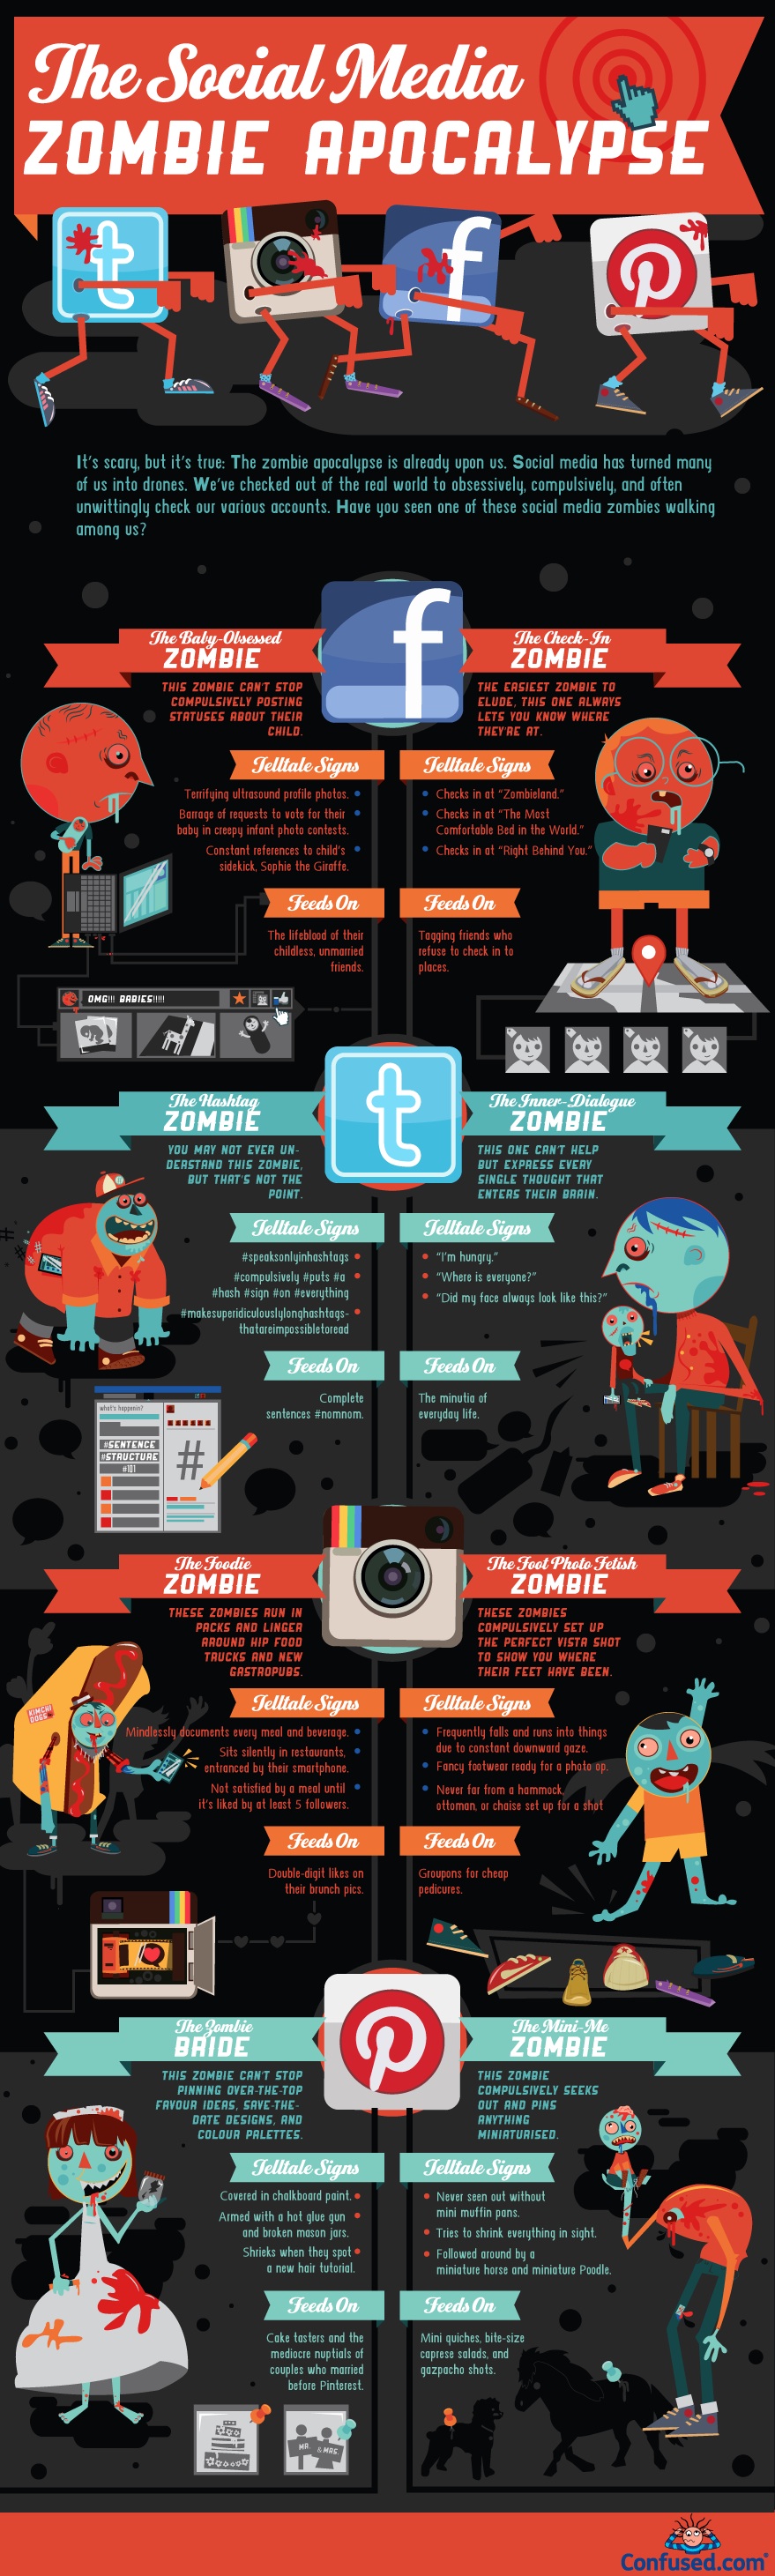 Are you a Social Media Zombie?